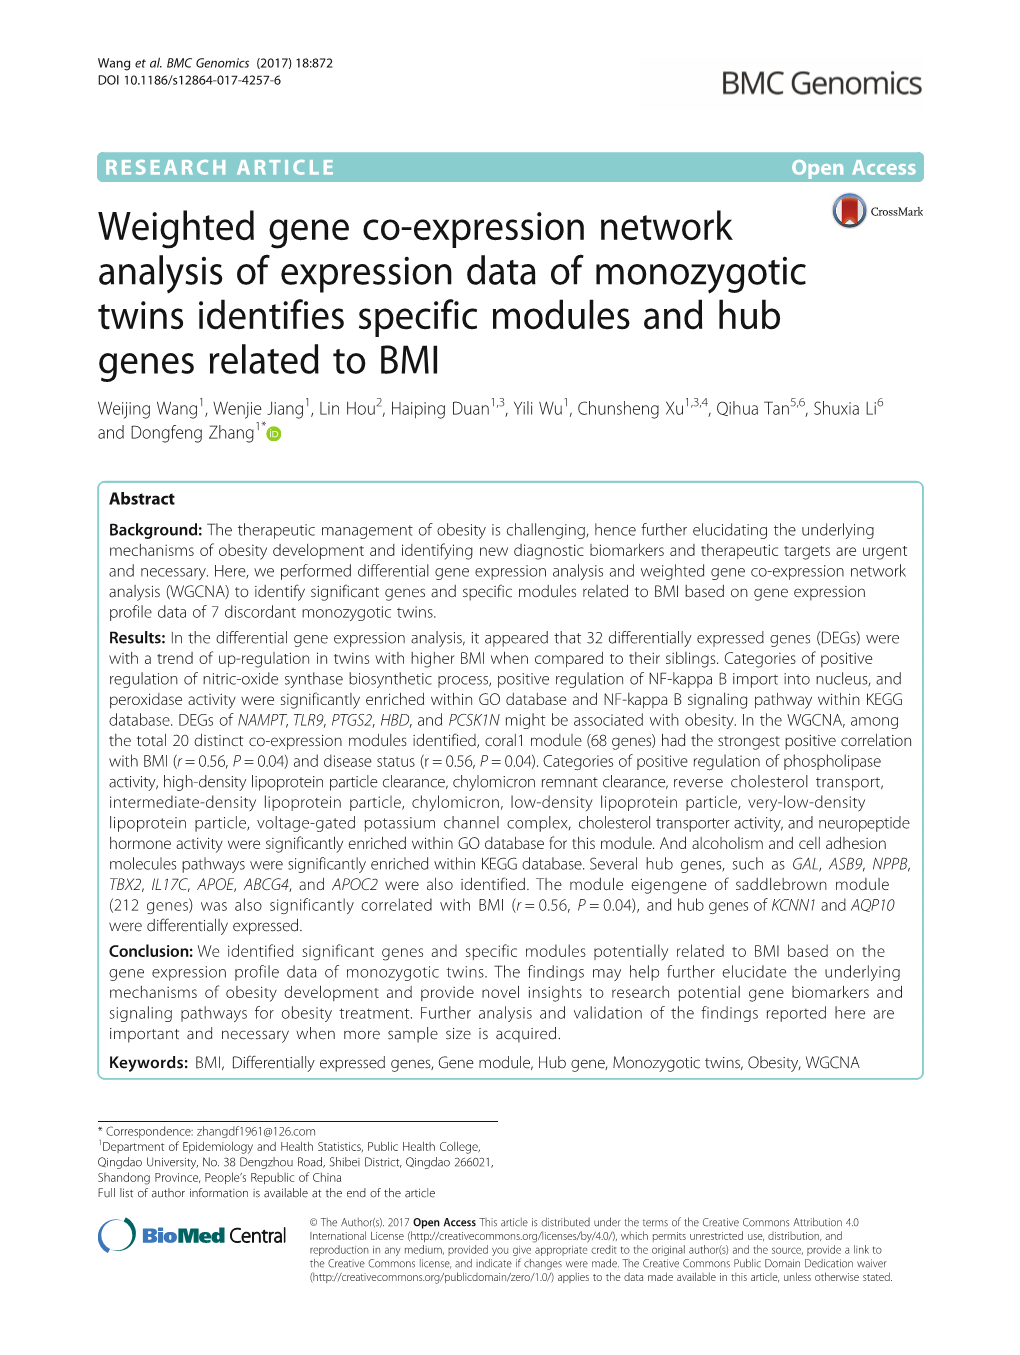 Weighted Gene Co-Expression Network Analysis of Expression Data Of